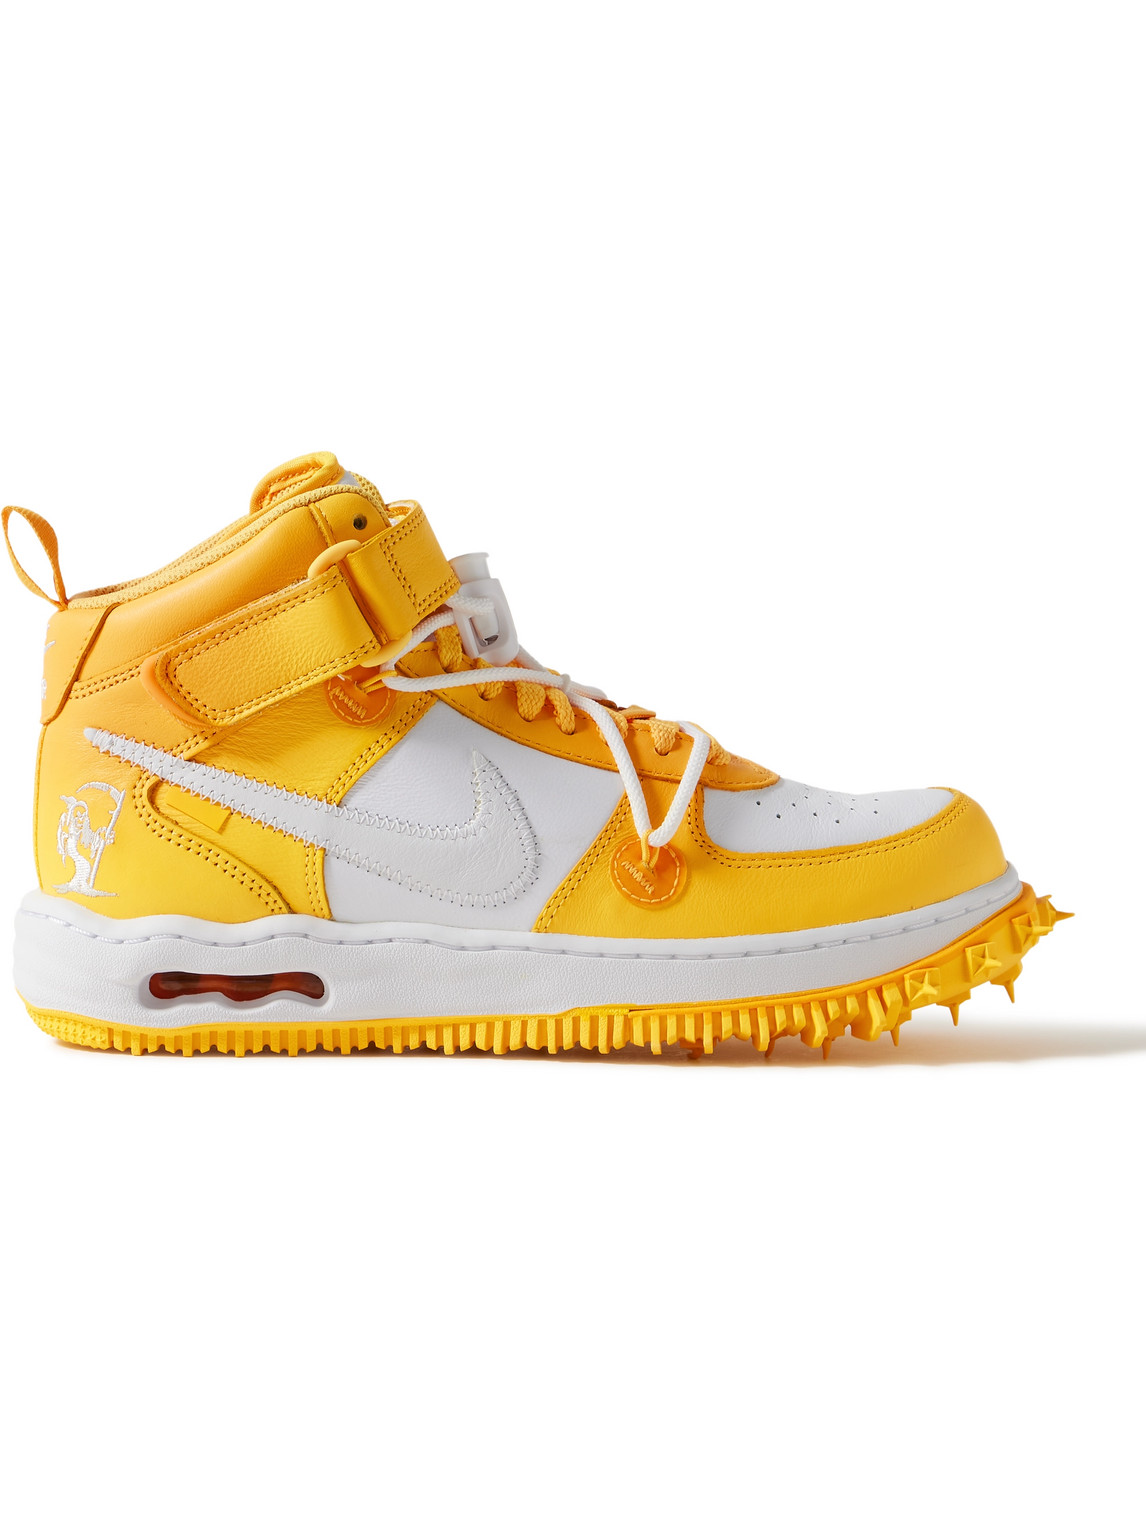 Off-White Air Force 1 Mid Two-Tone Leather High-Top Sneakers